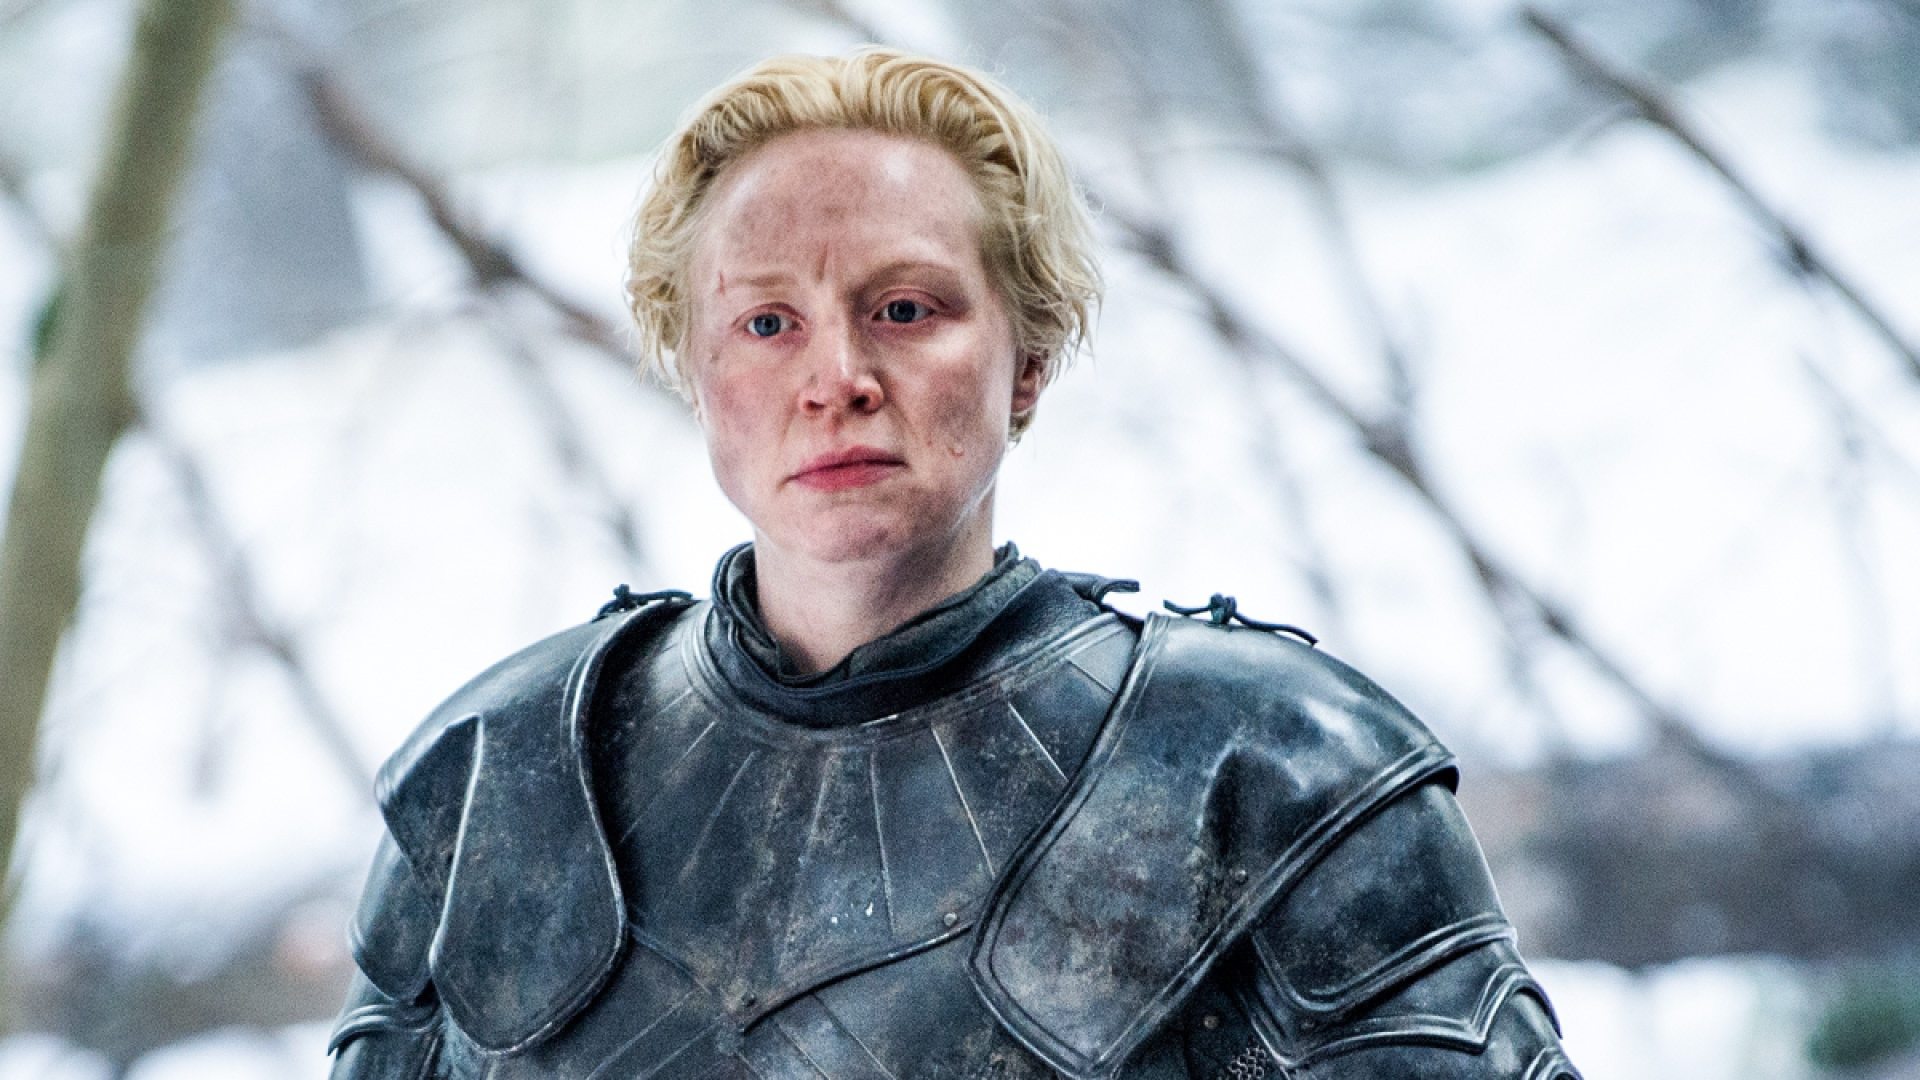 The love of my life Brienne of Tarth as she appeared played by the other love of my life Gwendoline Christie in Game of Thrones